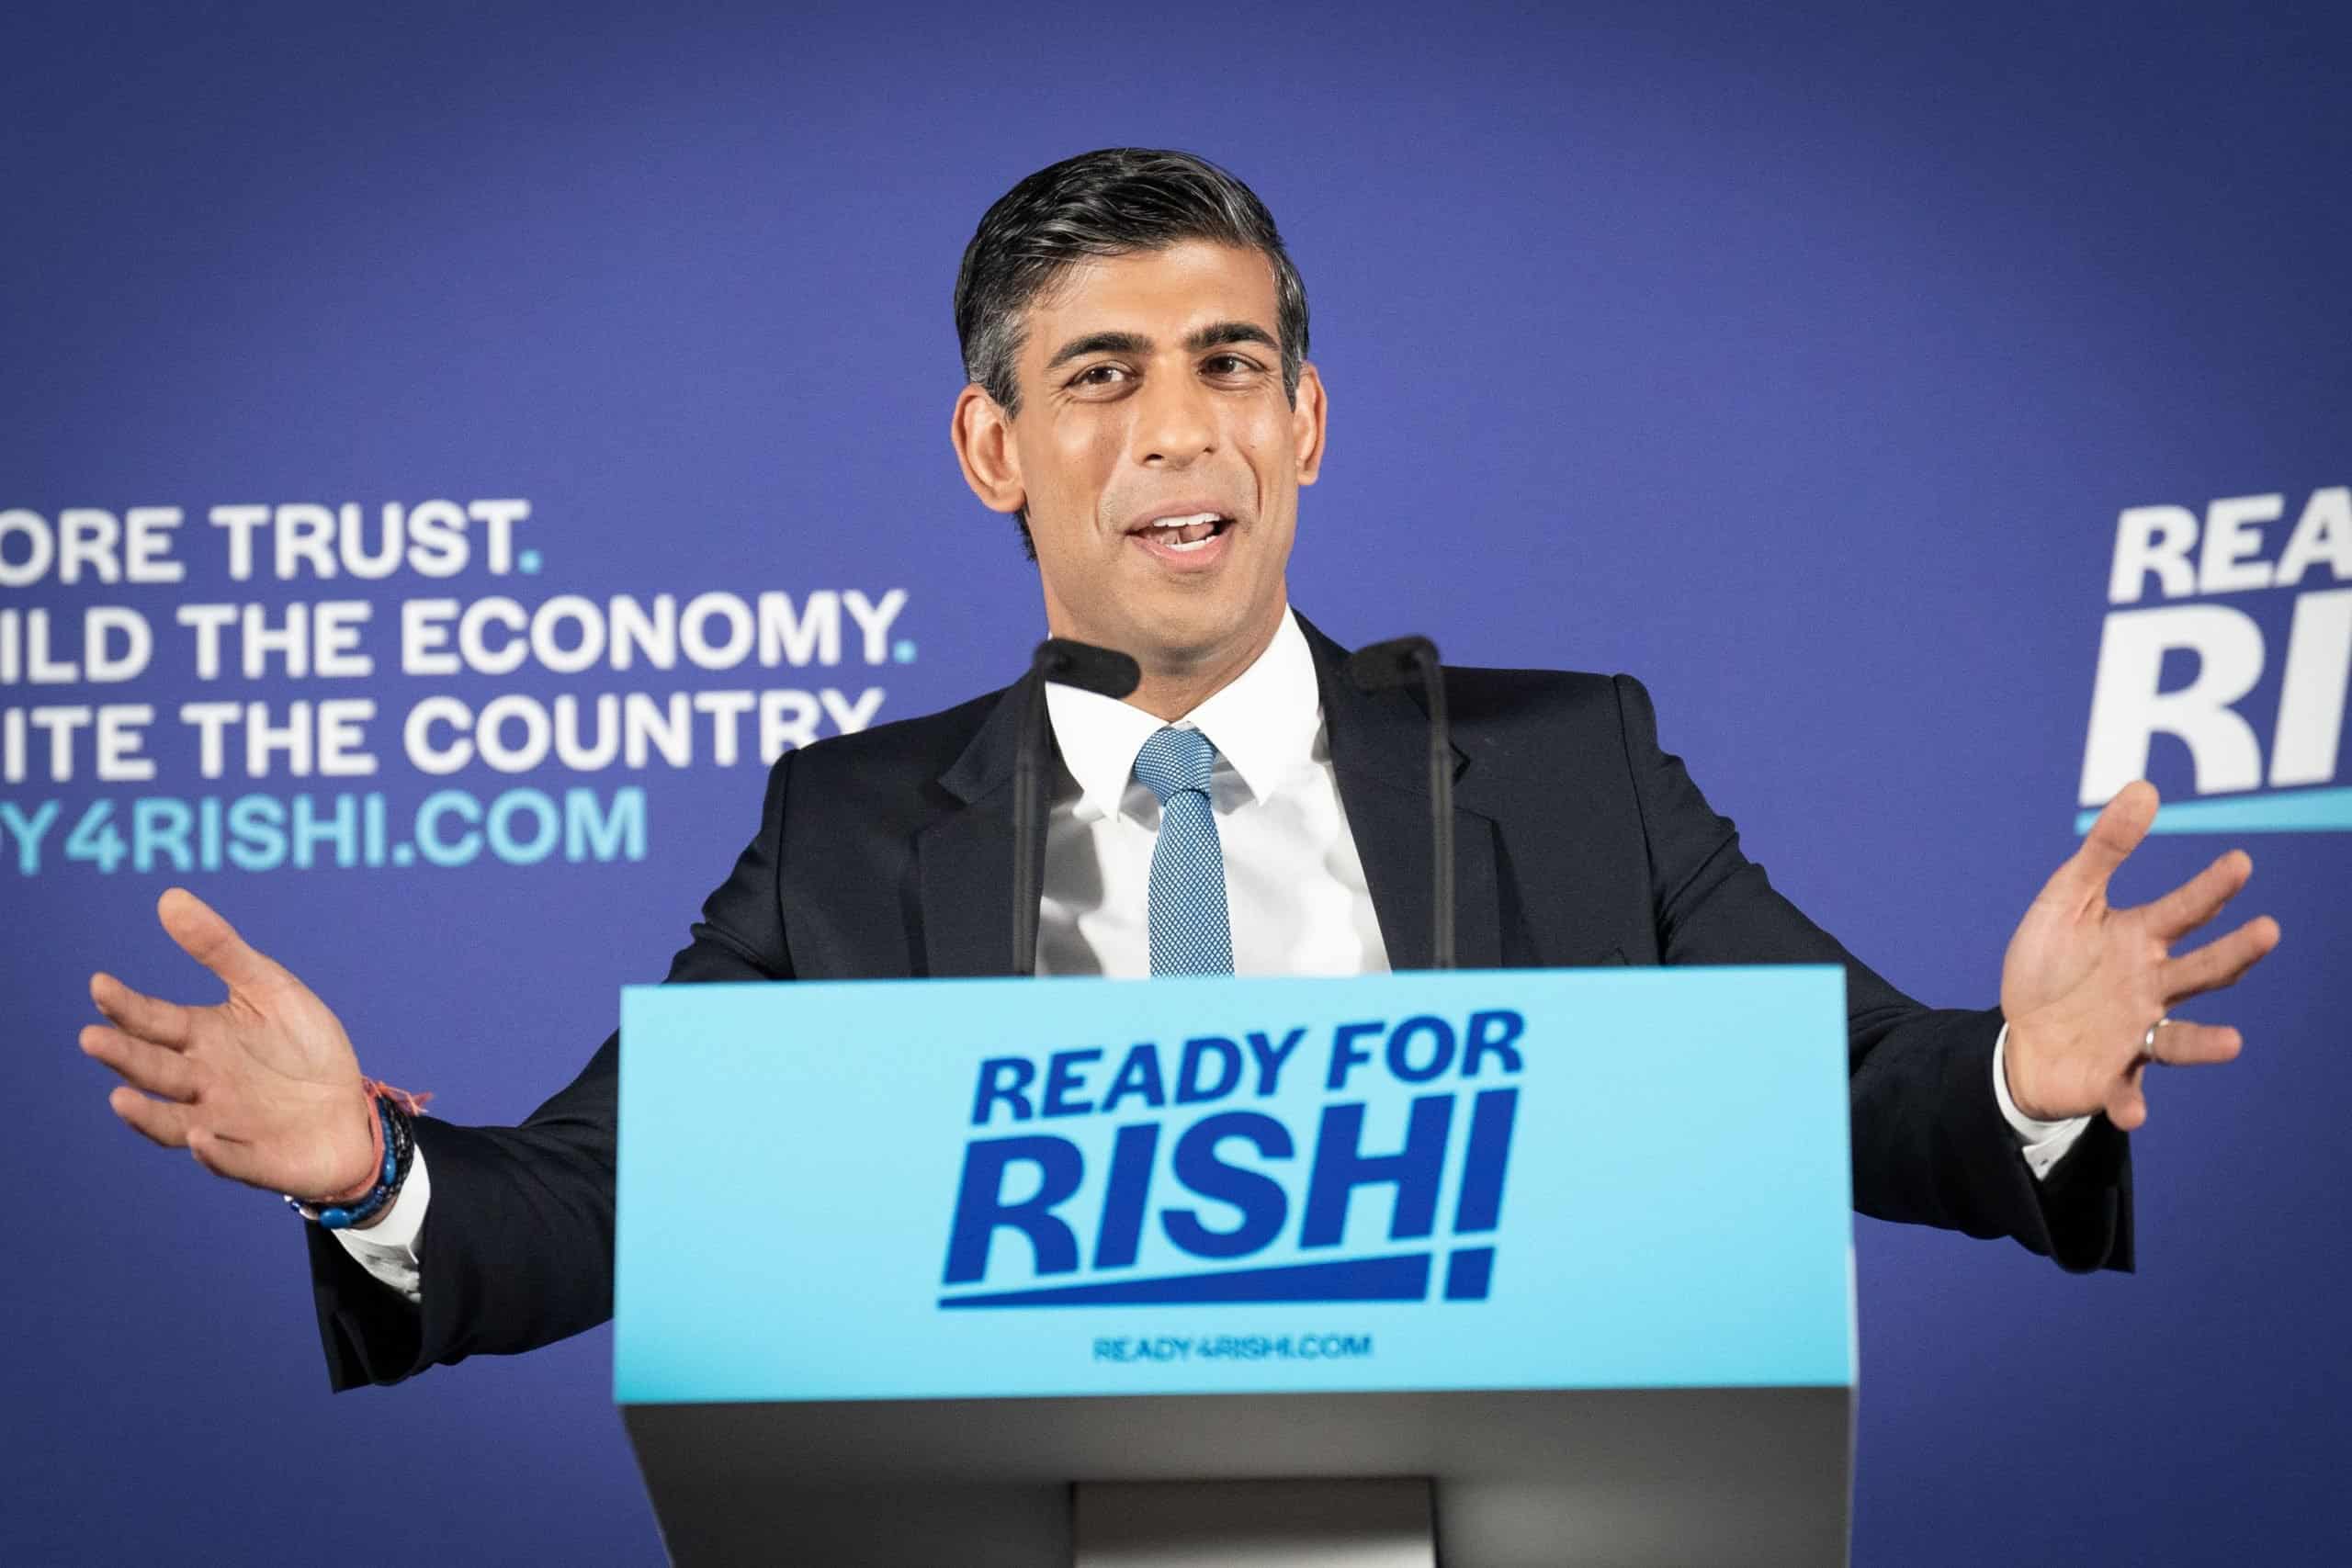 Rishi blames EU ‘low-growth mentality’ as he pledges to scrap European laws in new plea to Brexiters